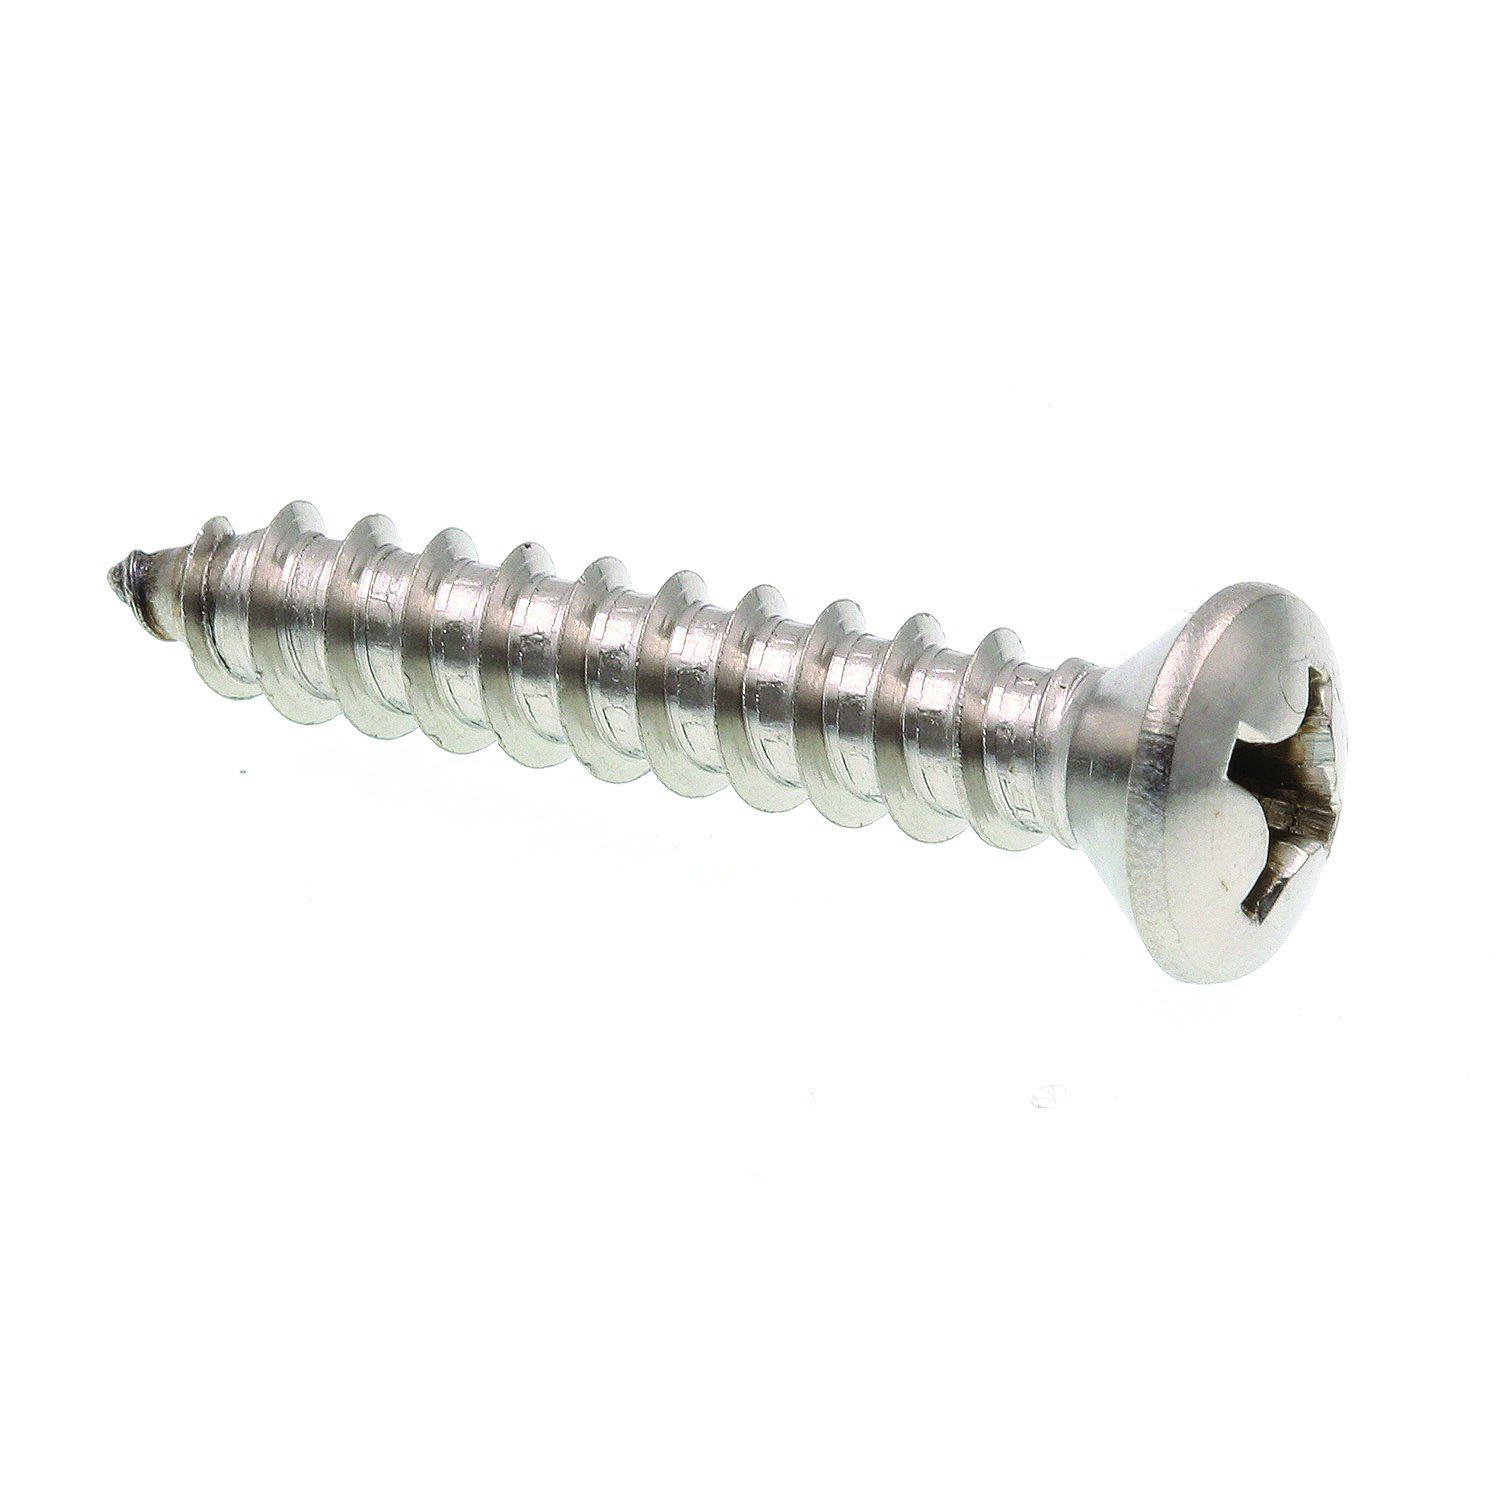 prime-line 9023690 sheet metal screw, self-tapping, oval head phillips, #14 x 1-1/2 in, grade 18-8 stainless steel, pack of 2